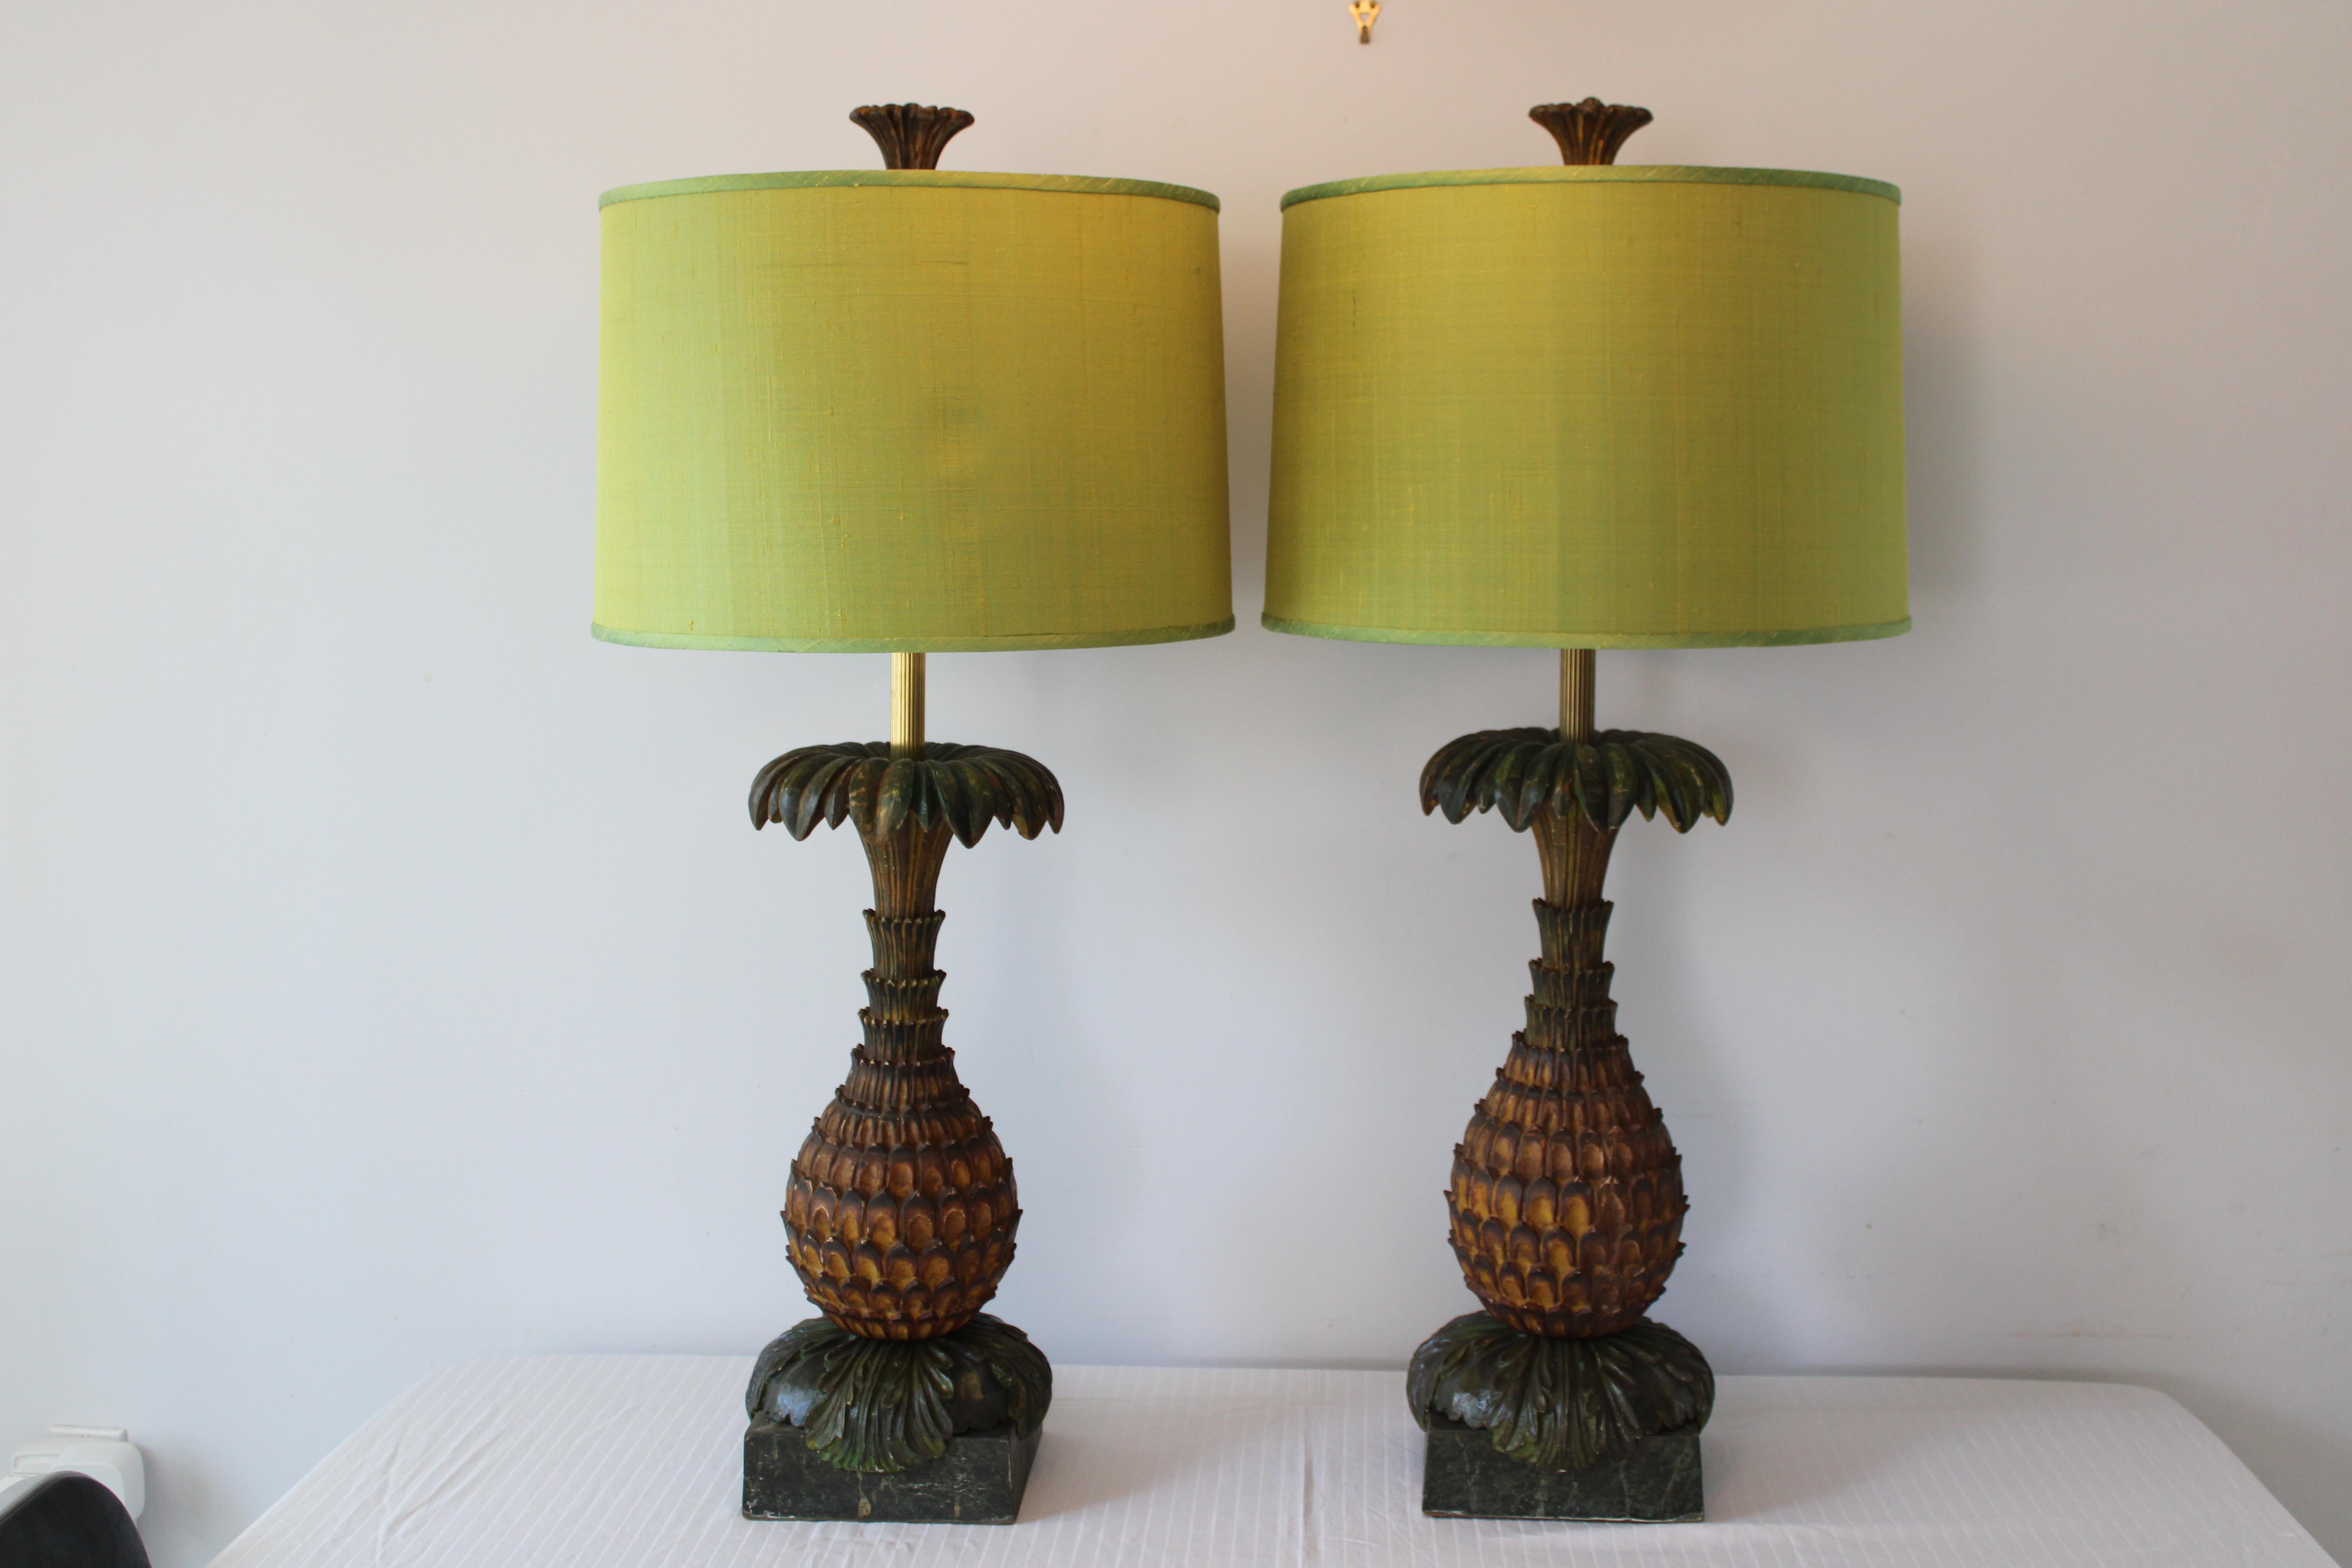 A matched pair of decorative wood pineapple lamps. We took a pair of decorative ornaments / posts and modified them to produce an elegant pair of lamps. Lamps measure 27